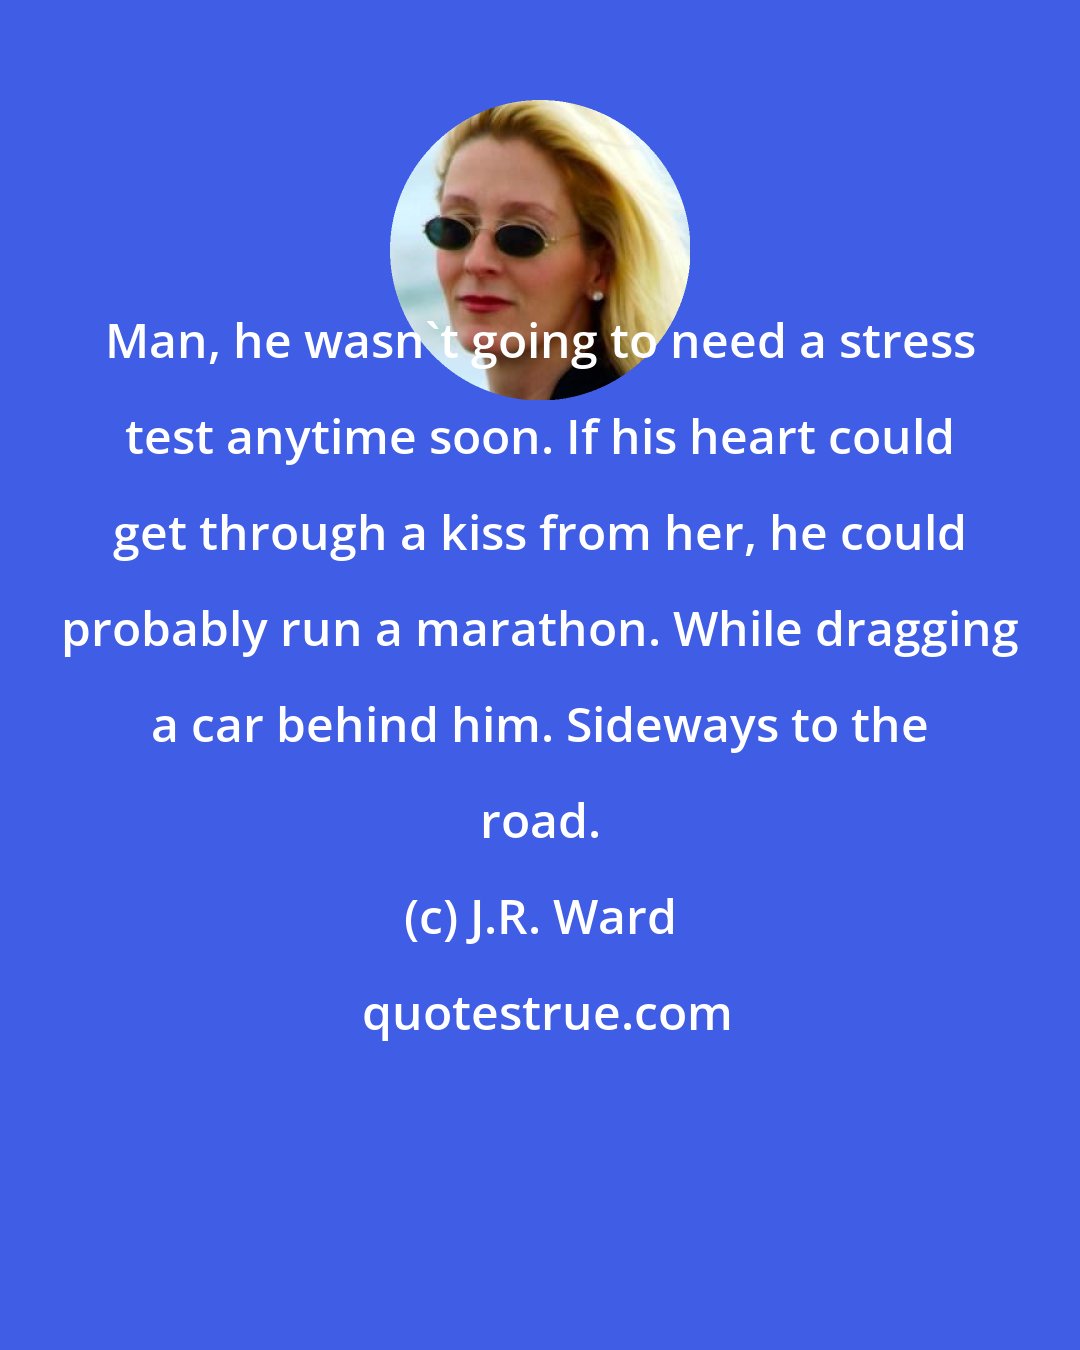 J.R. Ward: Man, he wasn't going to need a stress test anytime soon. If his heart could get through a kiss from her, he could probably run a marathon. While dragging a car behind him. Sideways to the road.